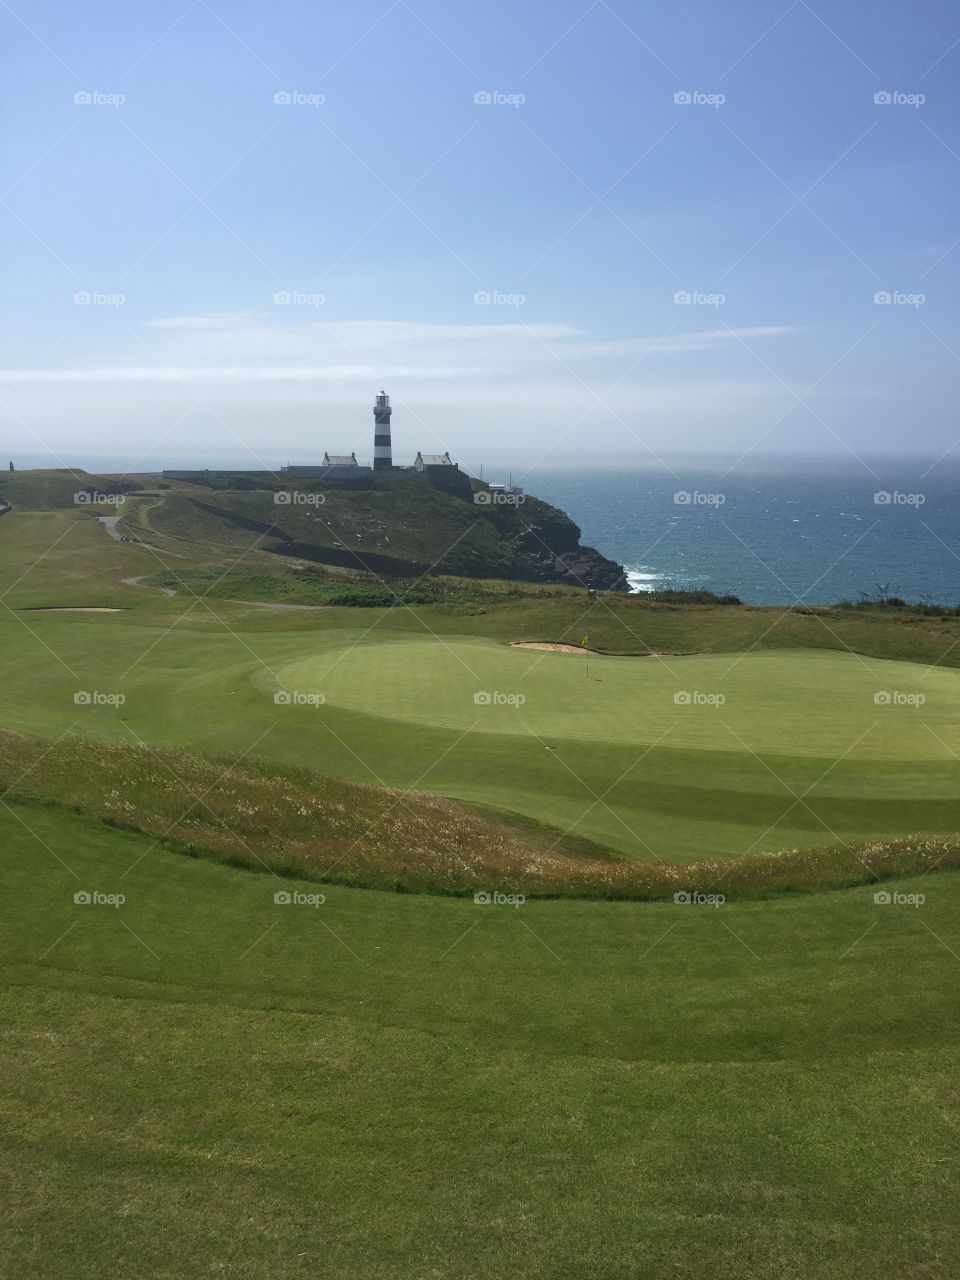 Old Head golf club in Ireland. Lighthouse in the background. Beautiful green fairways and greens. 